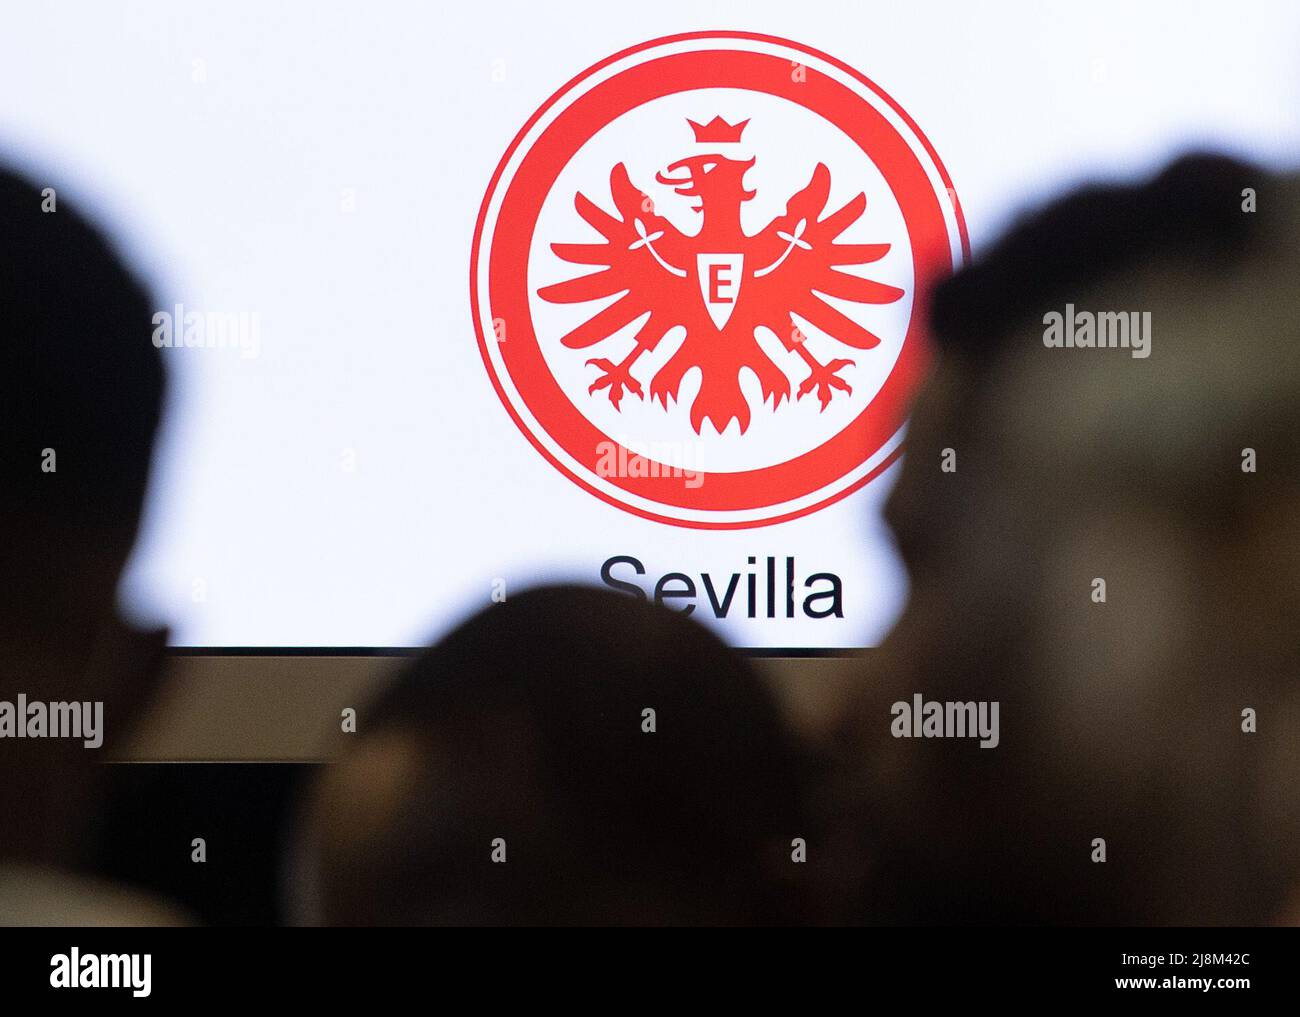 17 May 2022, Hessen, Frankfurt/Main: The crest of Eintracht Frankfurt is seen at the counter of an airline at Frankfurt Airport as passengers check in here for a flight to Seville. There, Eintracht Frankfurt will face Glasgow Rangers in the Europa League on Wednesday (18.05). Photo: Boris Roessler/dpa Stock Photo